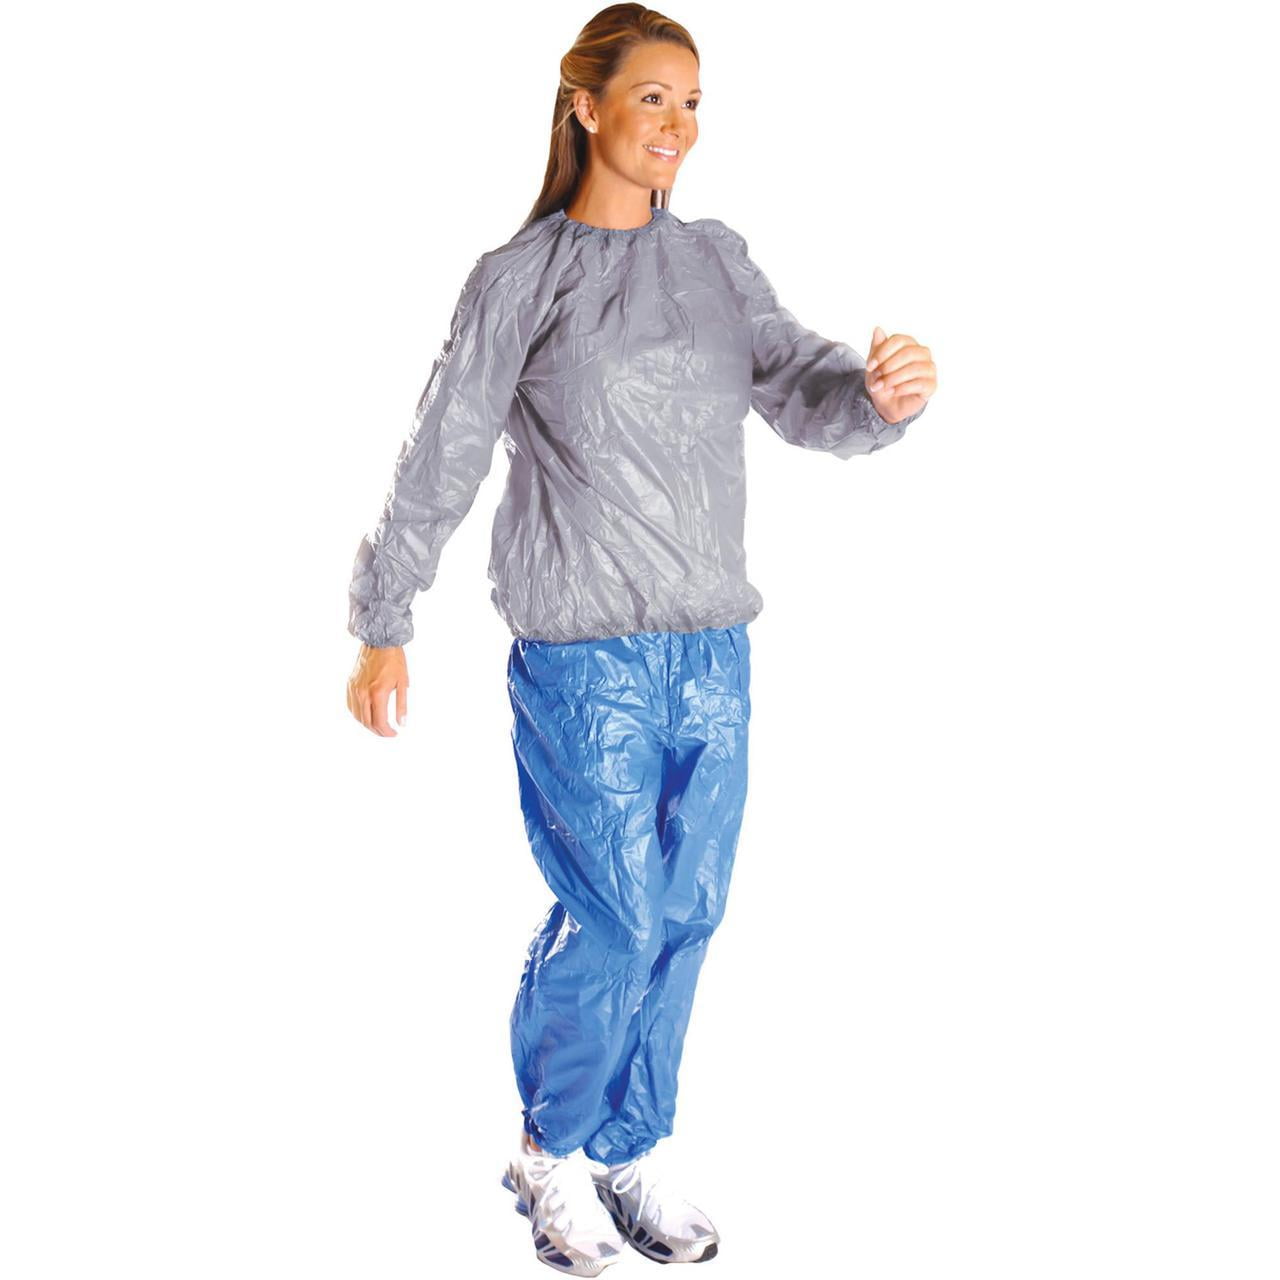 Only for the bath Sauna suit Frassette Half body bath Diet Chilliness Swelling 